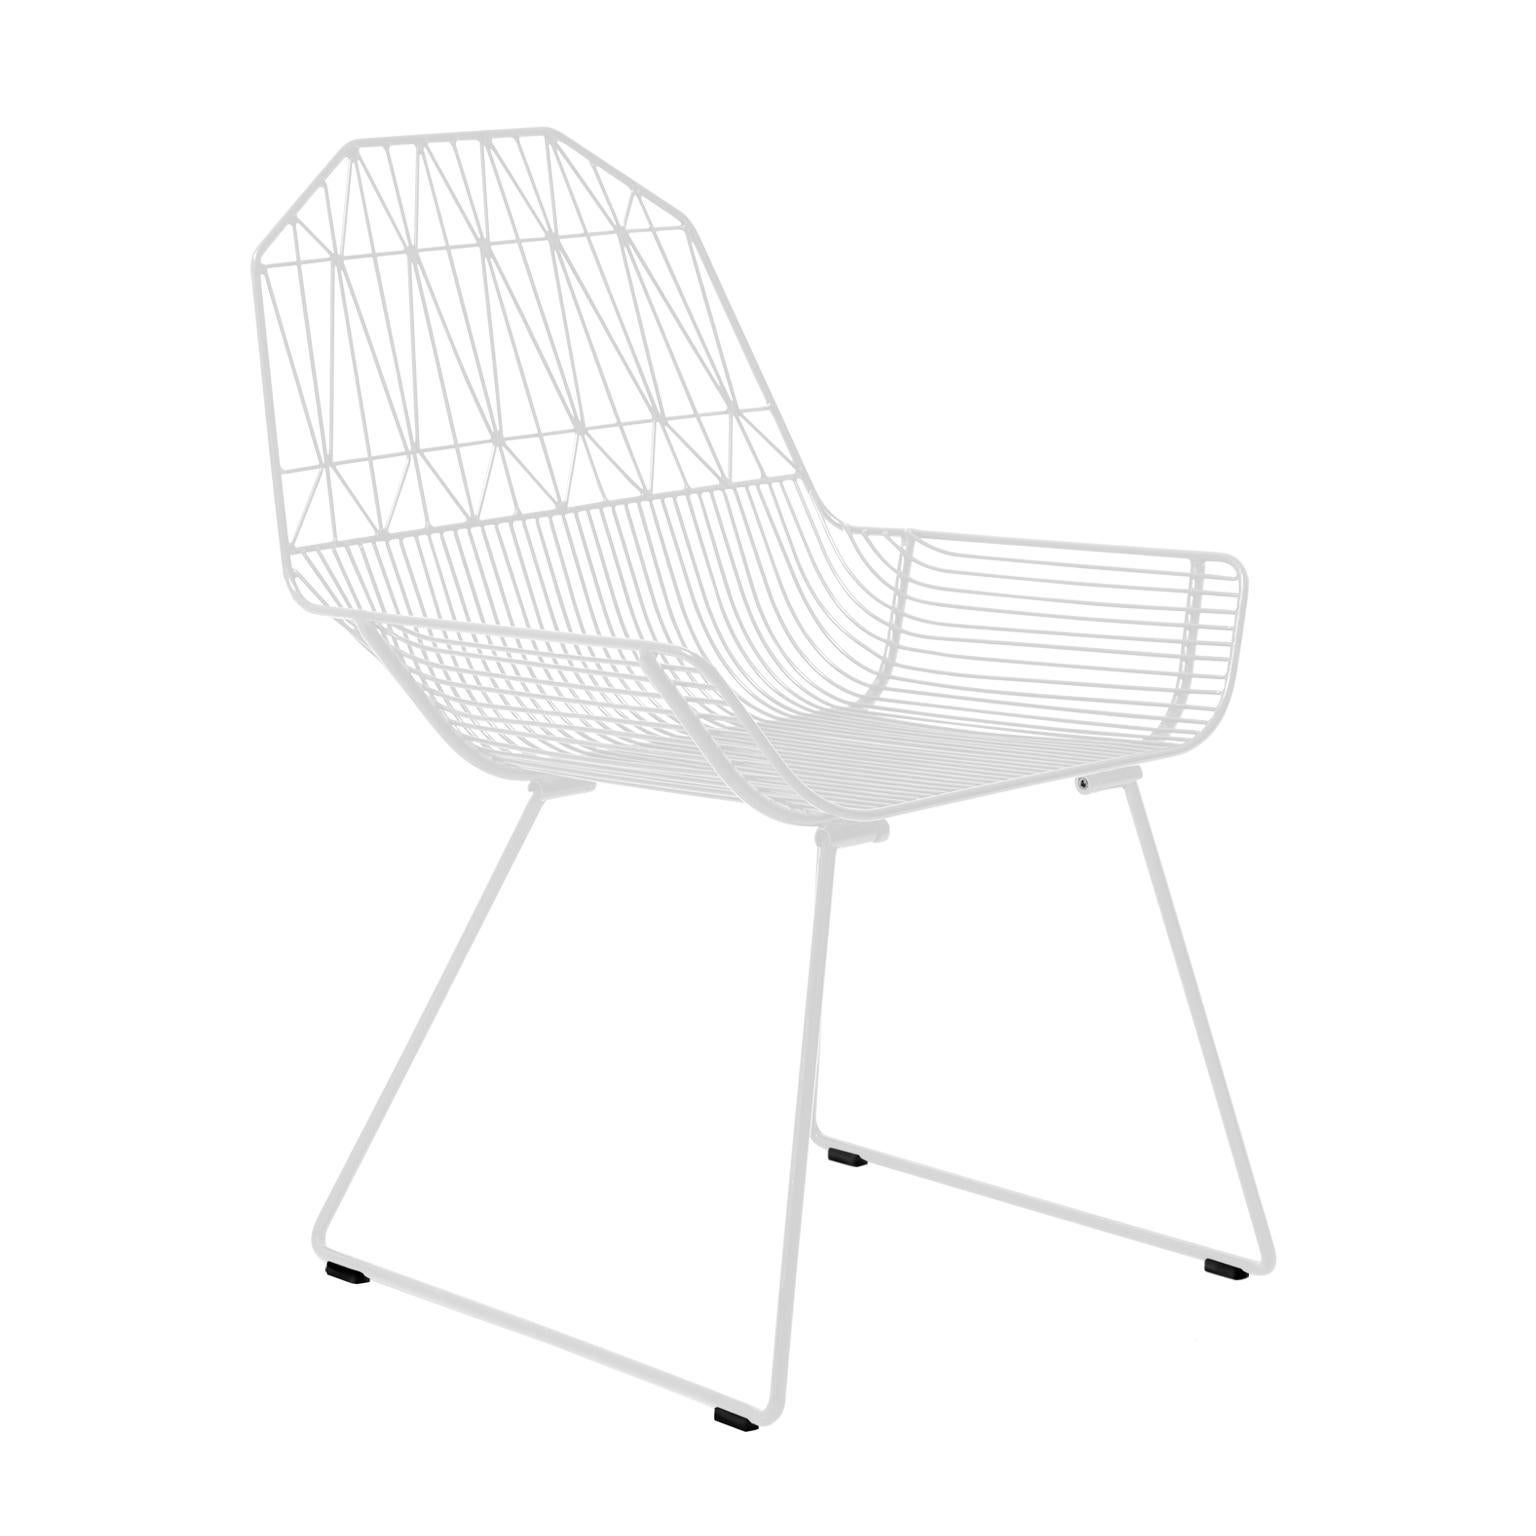 Bend Goods wire furniture
The farmhouse lounge is a unique take on the wire lounge chair, with a backrest inspired by Pennsylvania Dutch barn architecture. The wide seat and gentle recline make this an ultra comfortable outdoor or indoor lounge